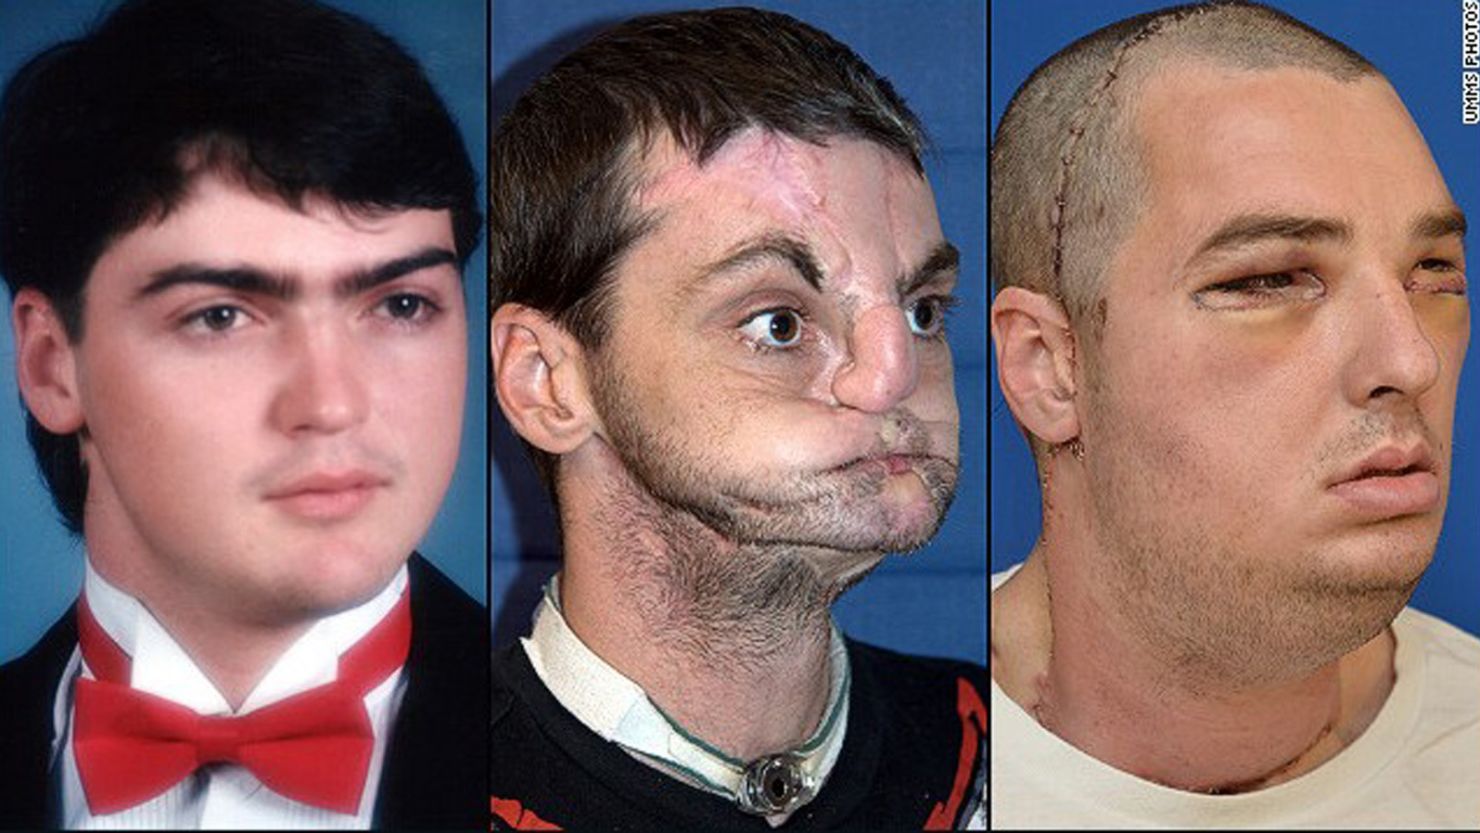 American Richard Norris: left, in high school in 1993; center, after suffering a gunshot injury; right, after face transplant surgery. 